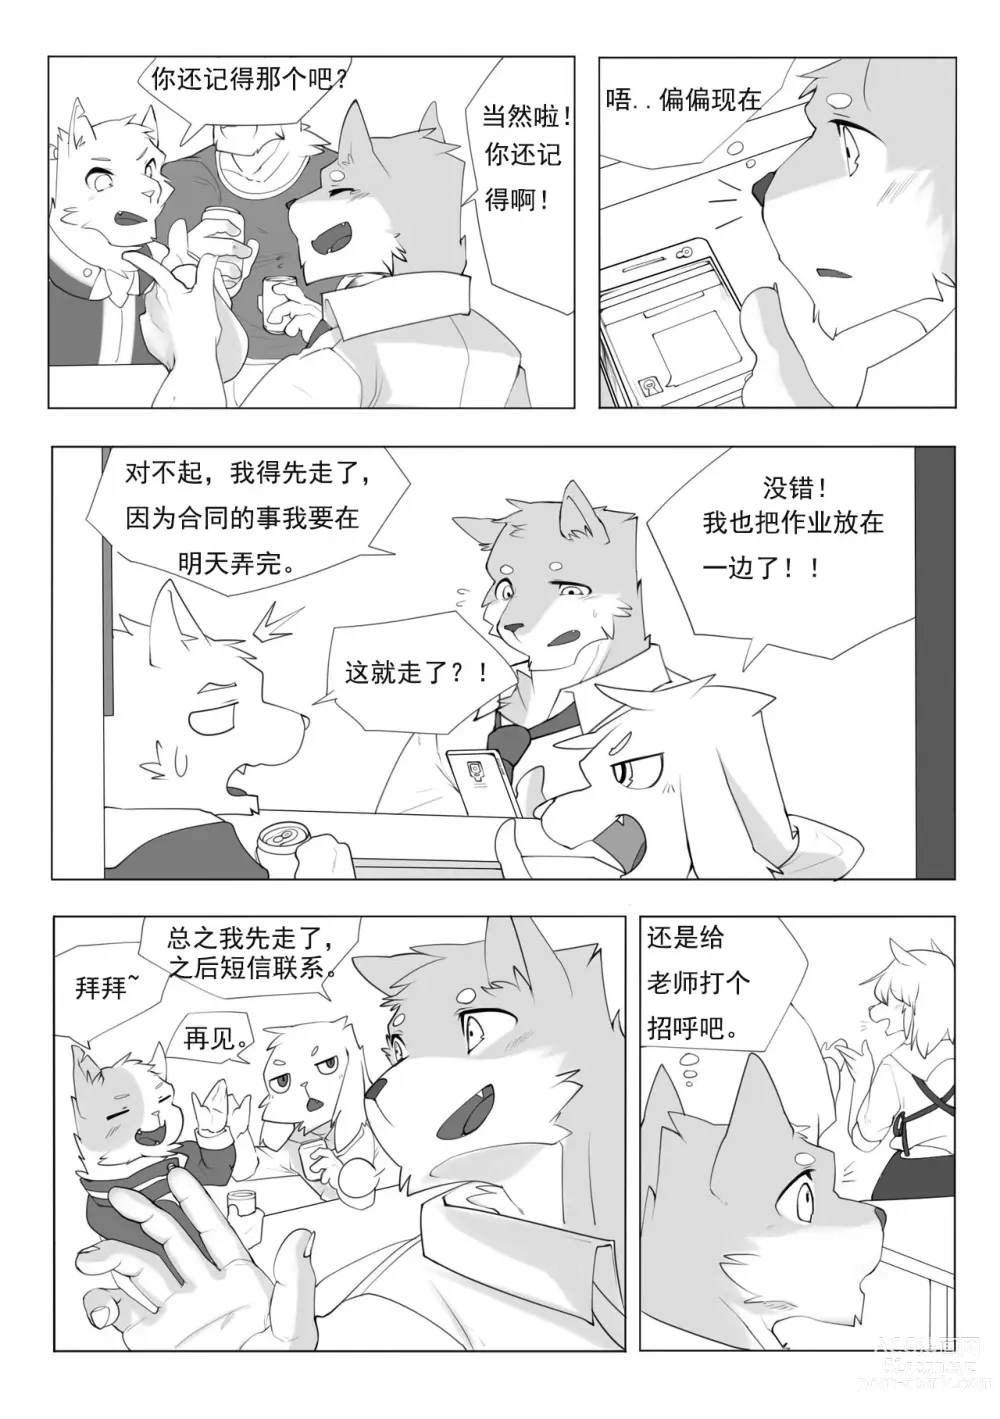 Page 11 of doujinshi 单恋 （工口译制）